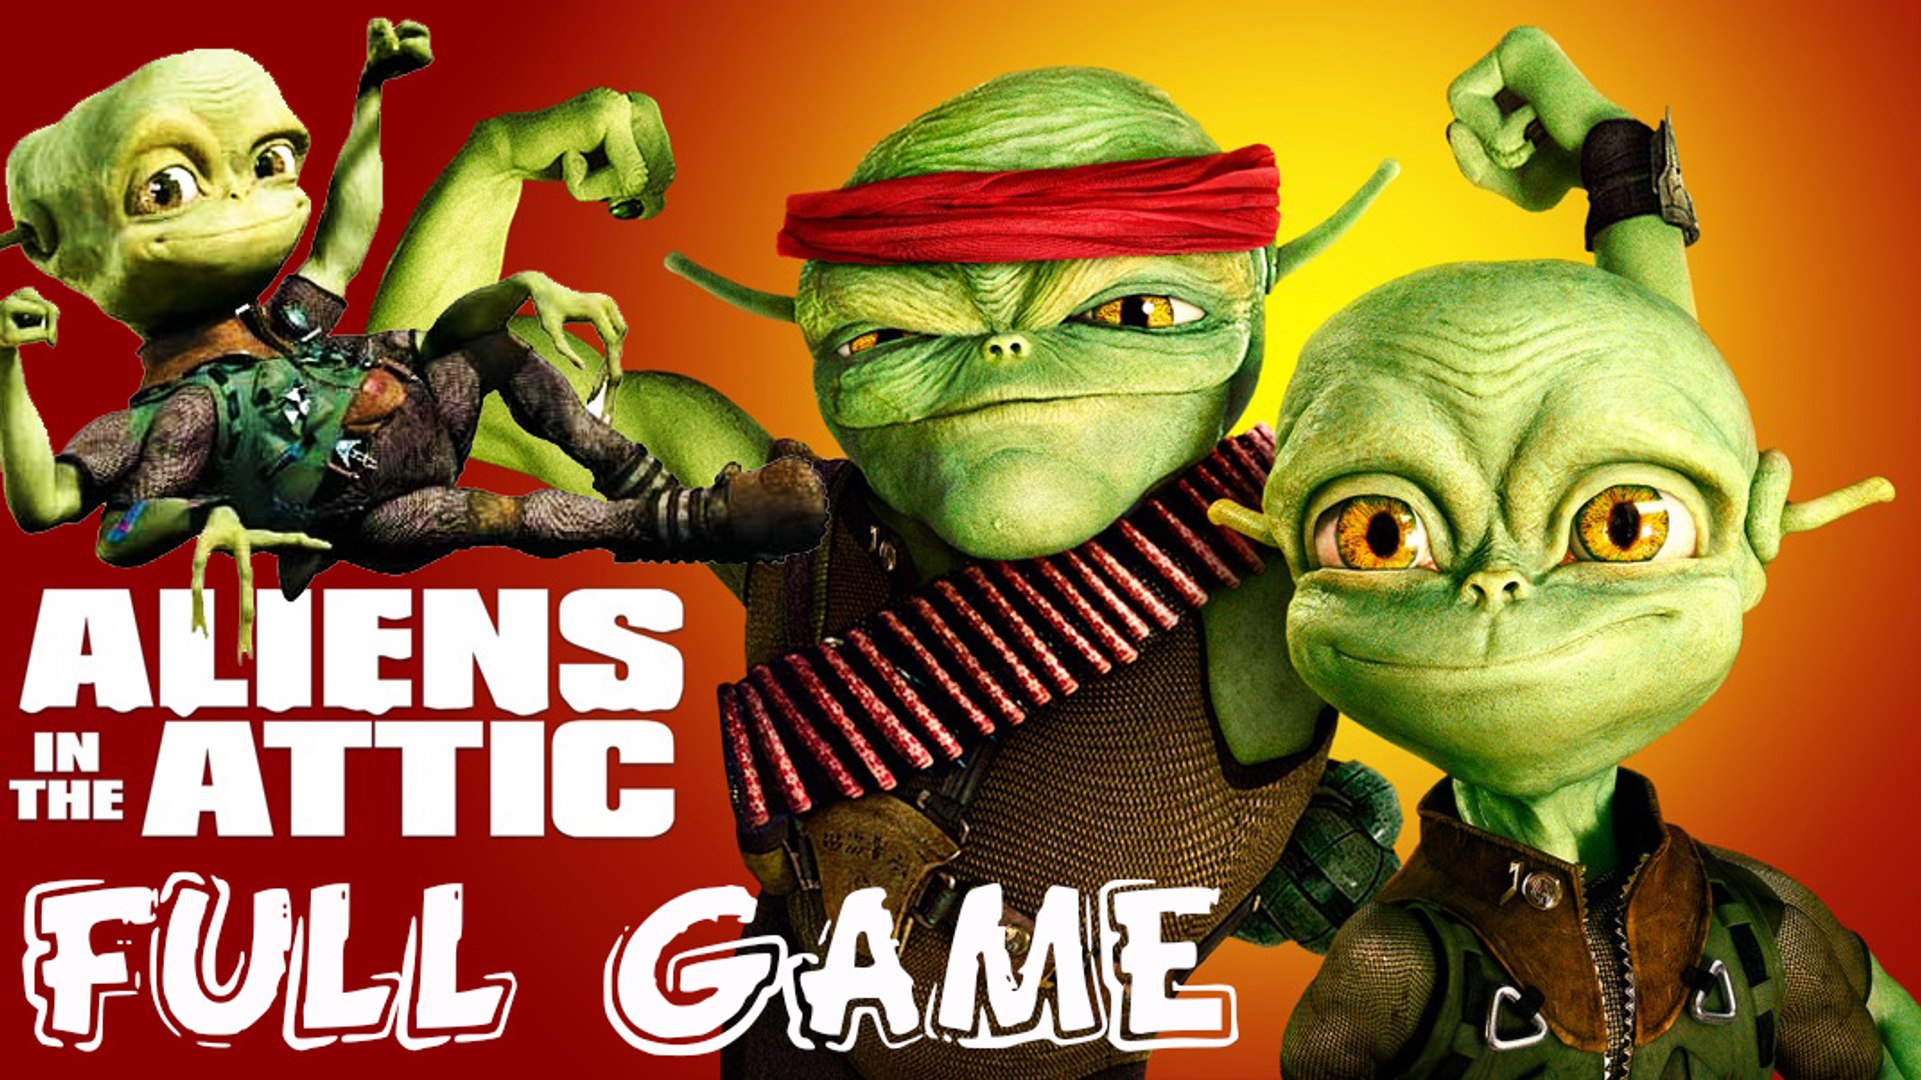 Aliens in the Attic FULL GAME Longplay (PS2, Wii, PC) - video Dailymotion